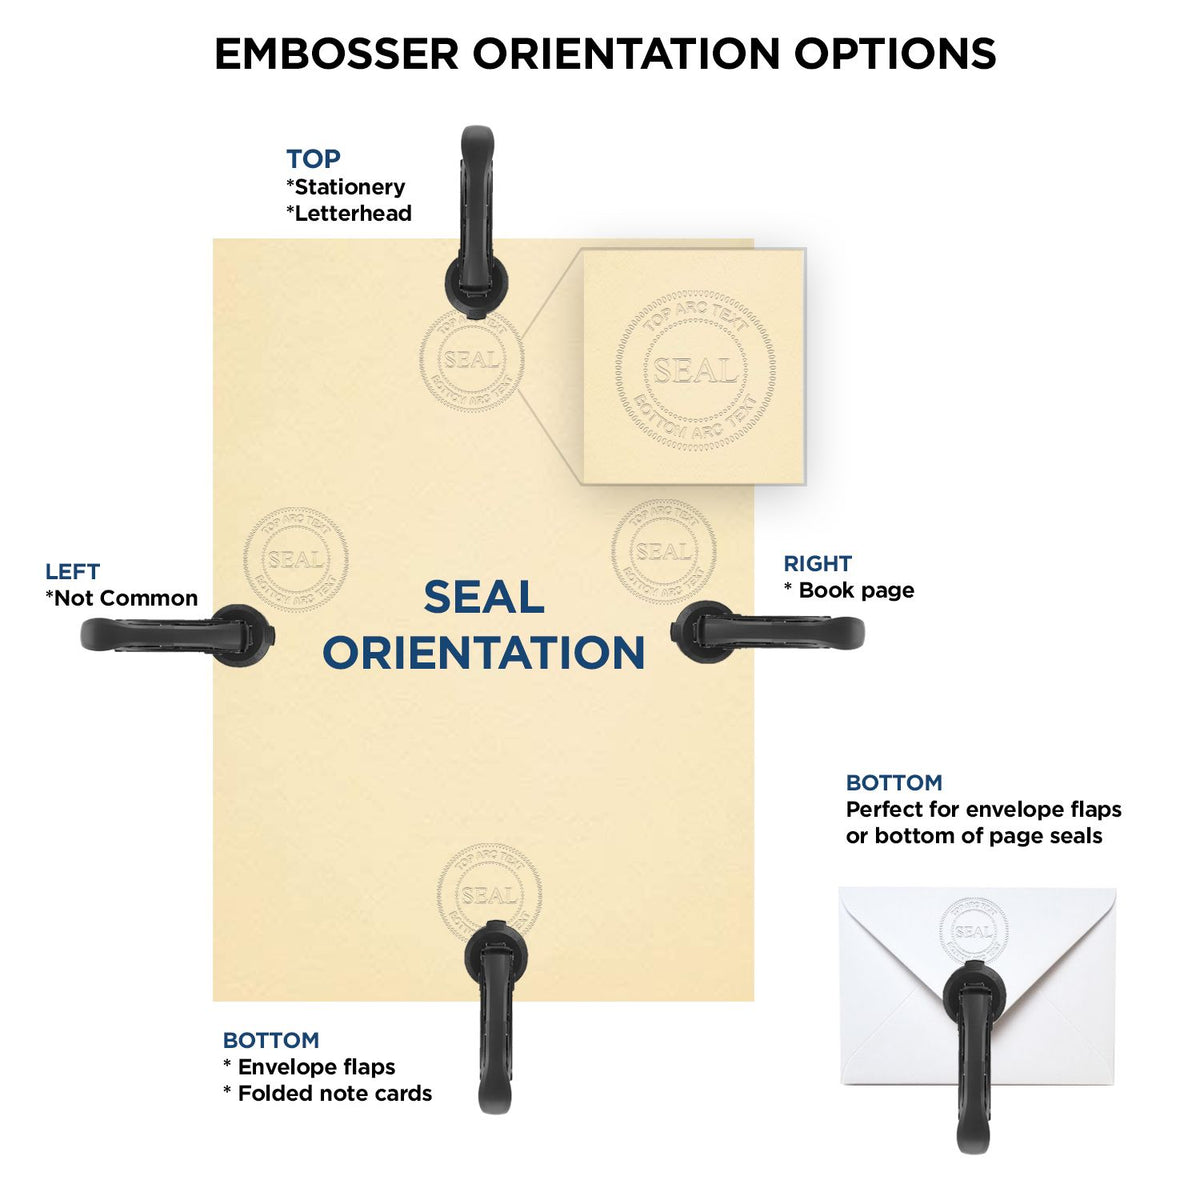 An infographic for the Heavy Duty Cast Iron Minnesota Engineer Seal Embosser showing embosser orientation, this is showing examples of a top, bottom, right and left insert.